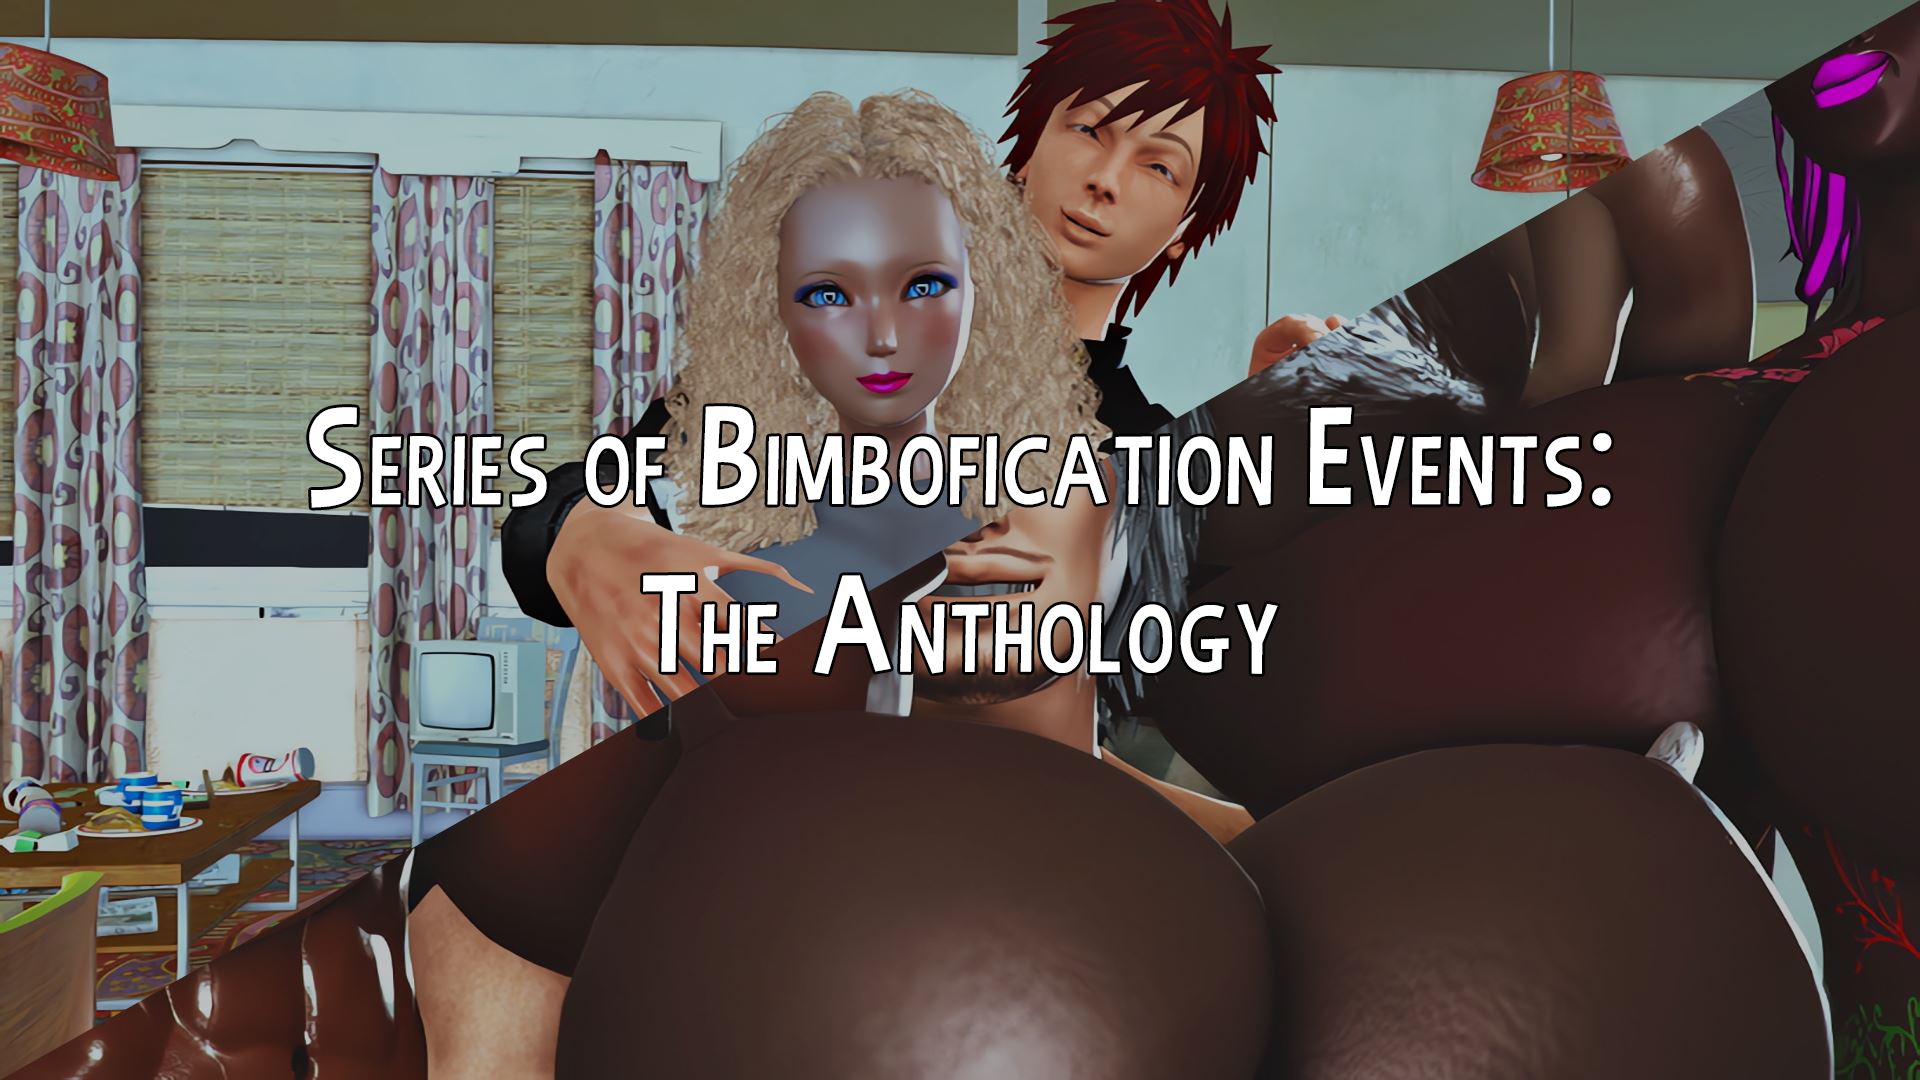 Series of Bimbofication Events: The Anthology porn xxx game download cover